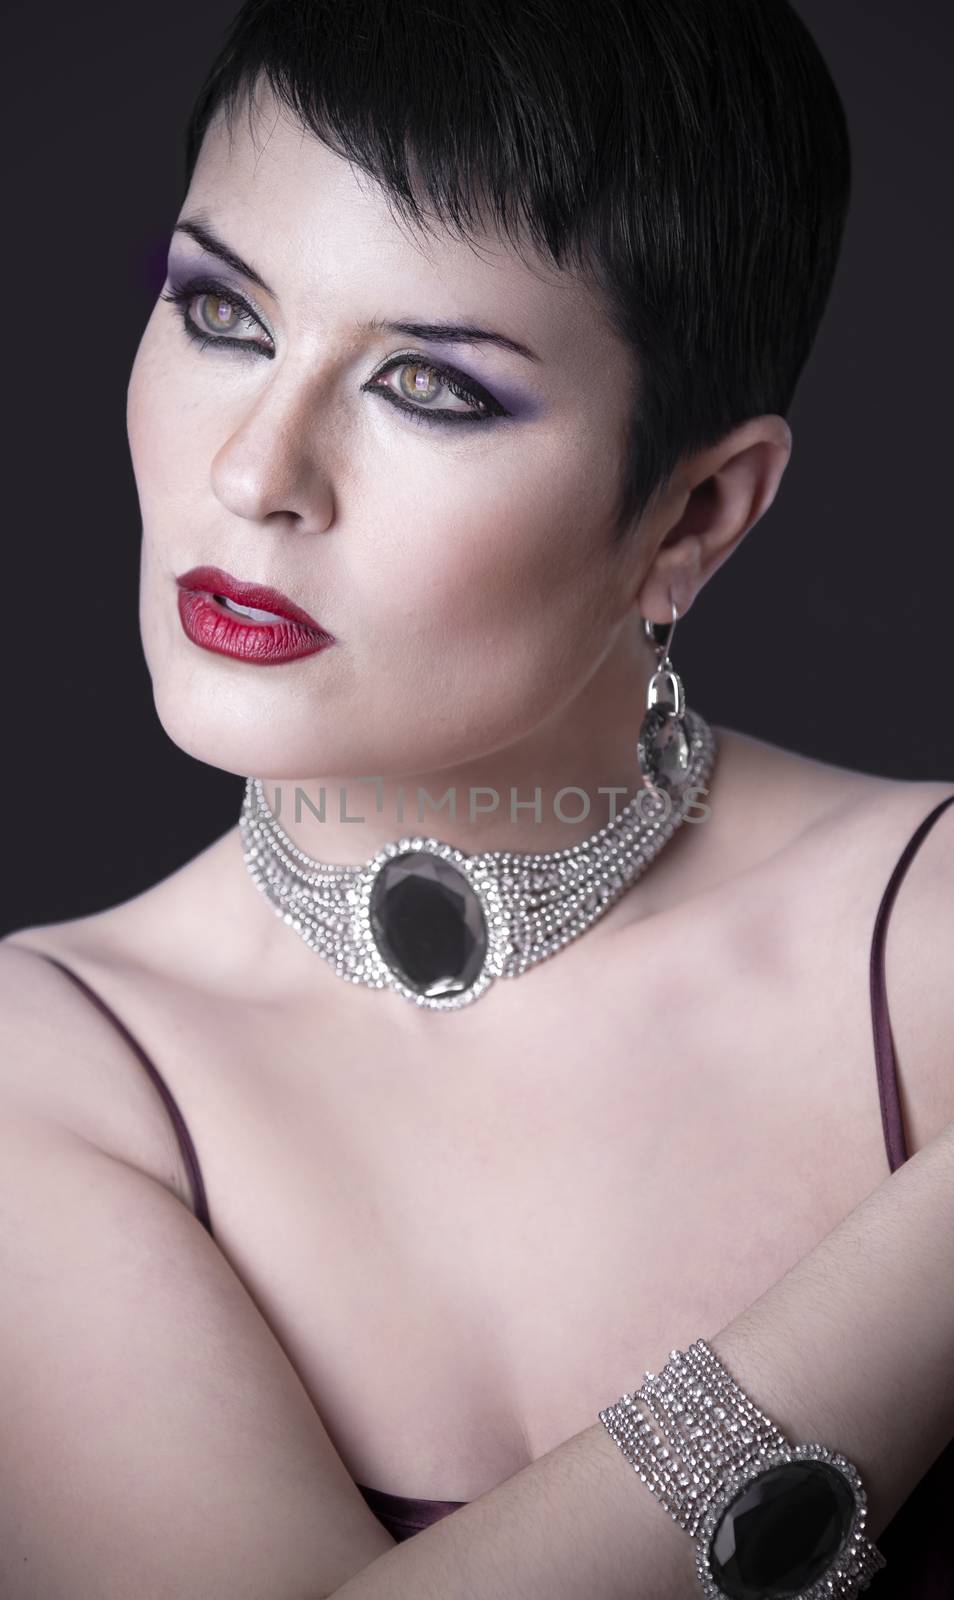 Sexy woman with elegant silver jewelry
looking interesting by FernandoCortes